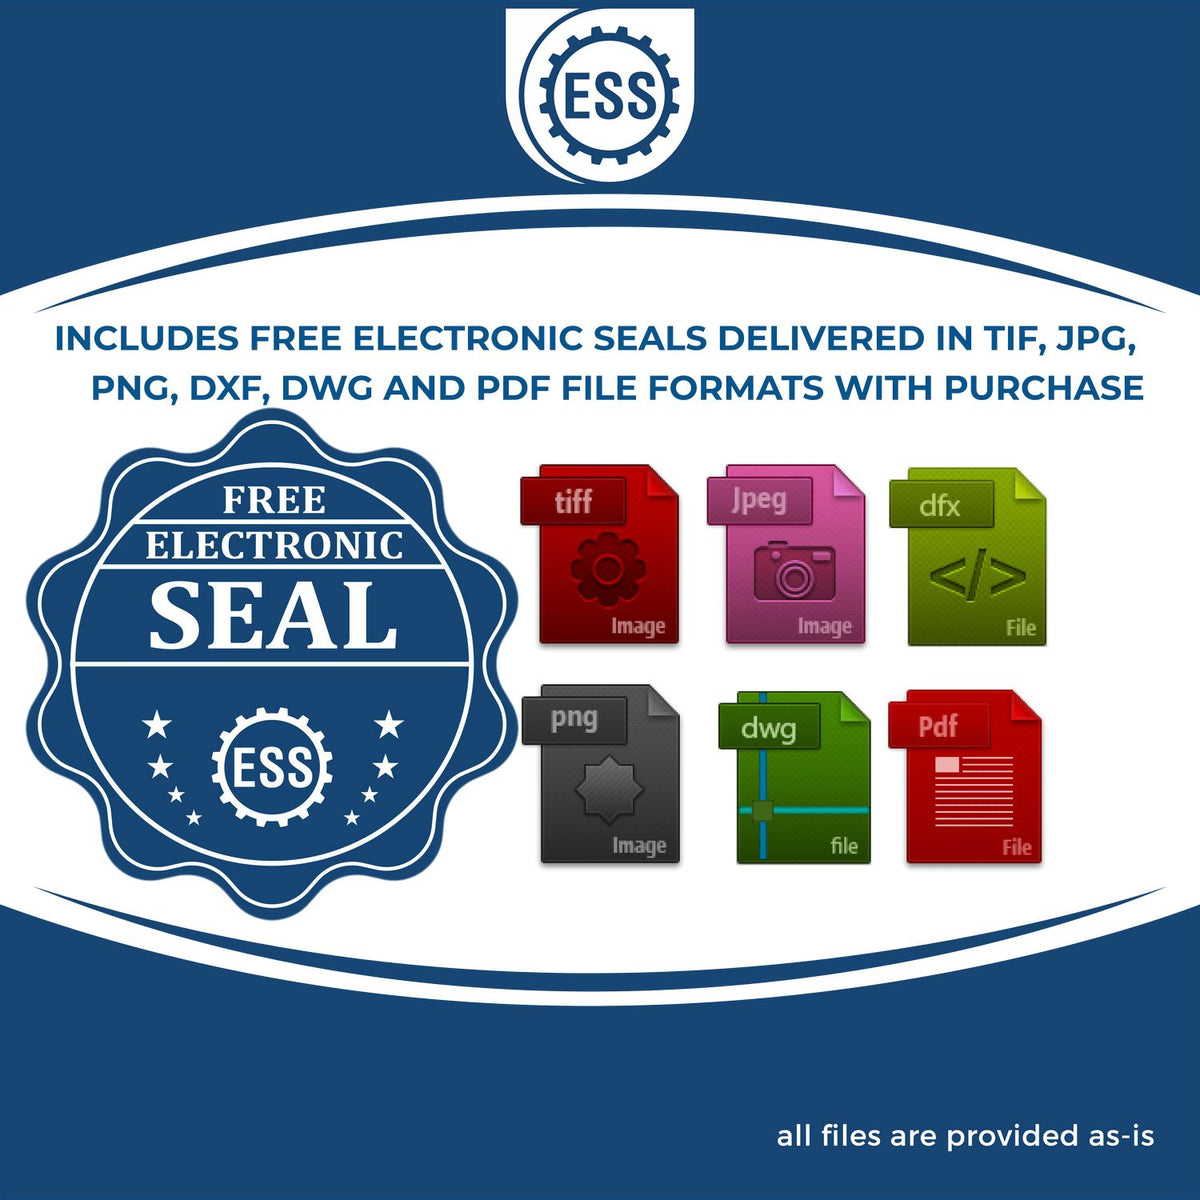 An infographic for the free electronic seal for the PSI Connecticut Notary Stamp illustrating the different file type icons such as DXF, DWG, TIF, JPG and PNG.